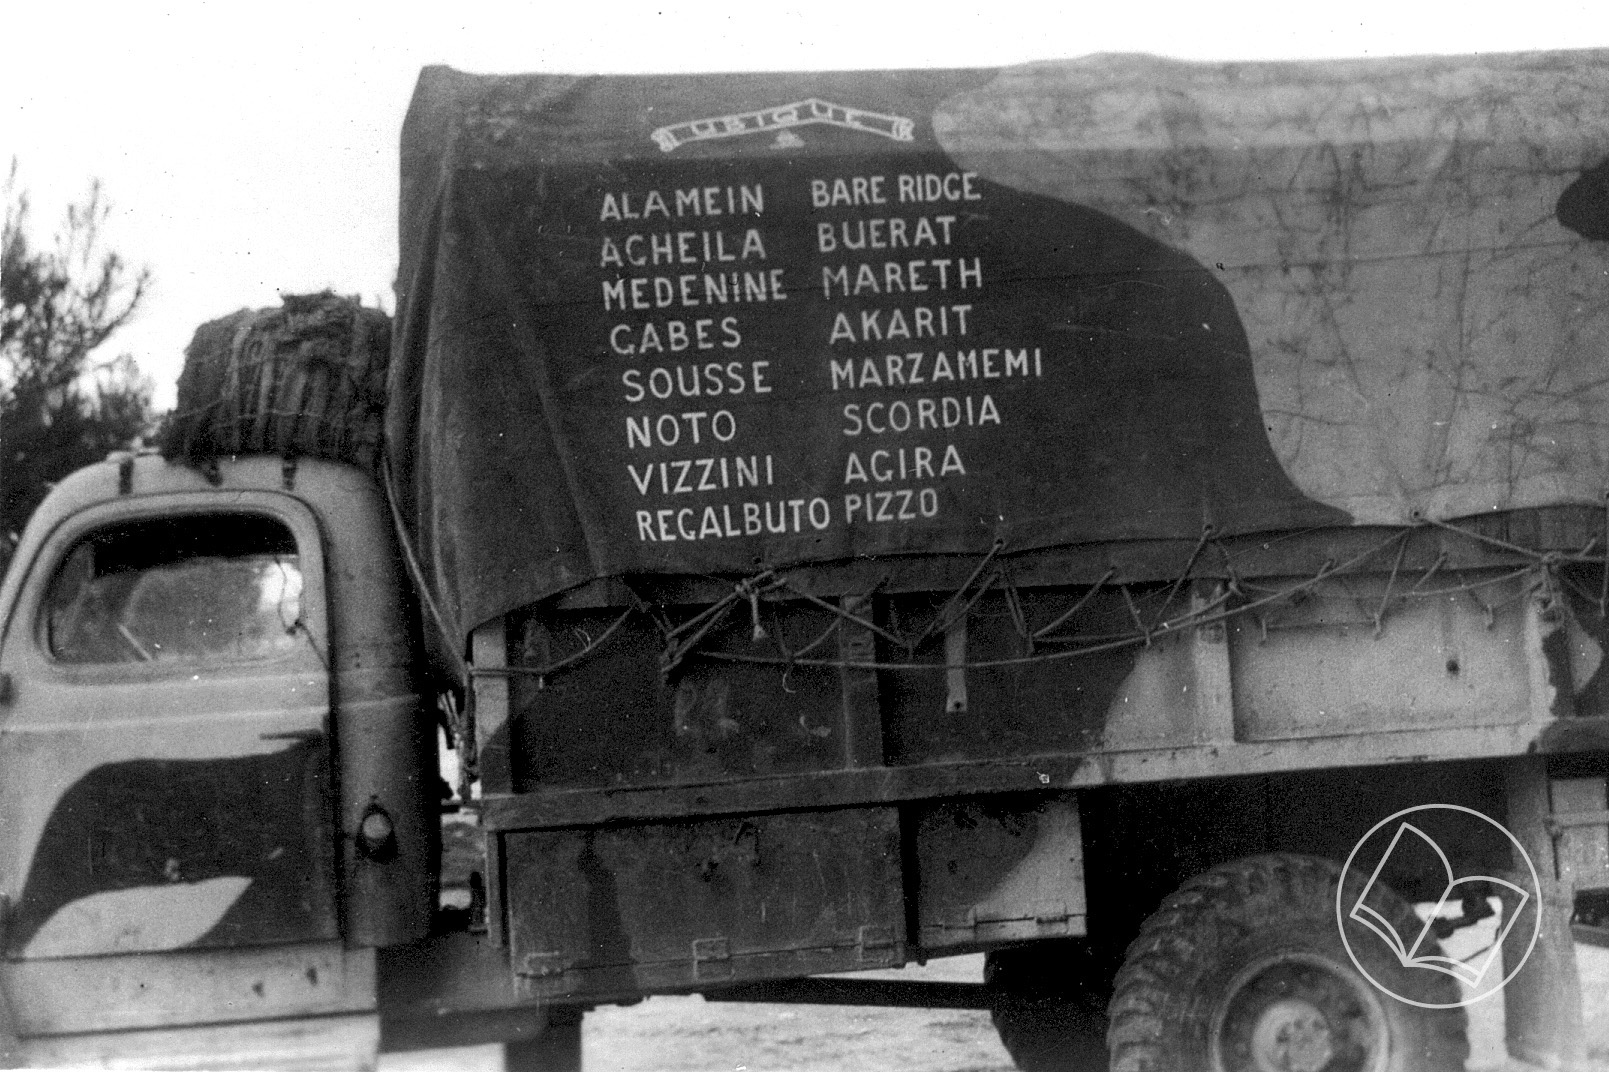 The Battery's route from Alamein to Pizzo